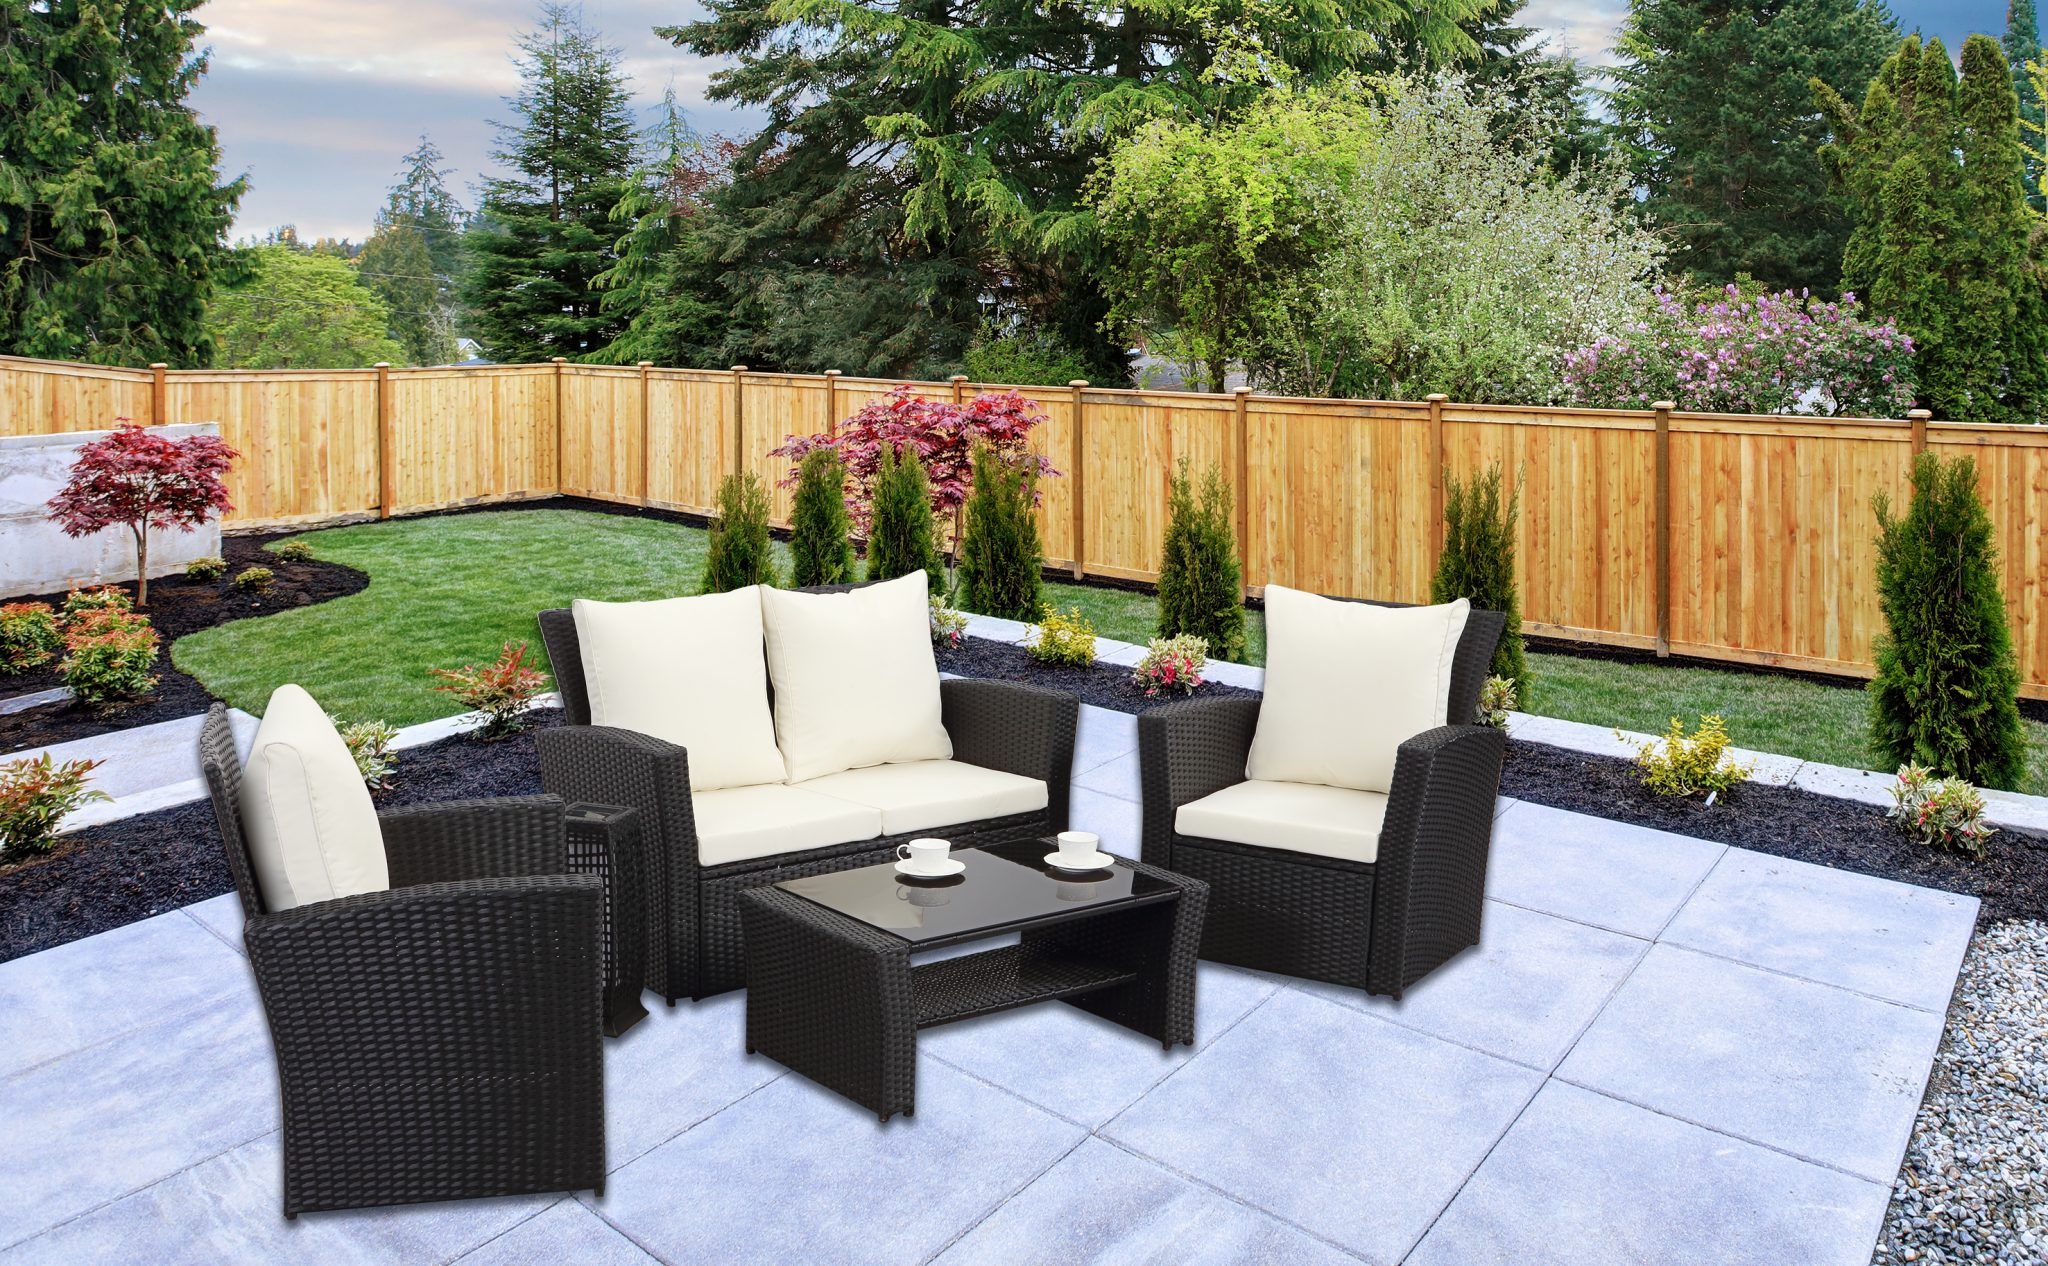 Black Rattan Garden Furniture With Two Chairs, Sofa And With Regard To Black And Tan Rattan Console Tables (View 15 of 20)